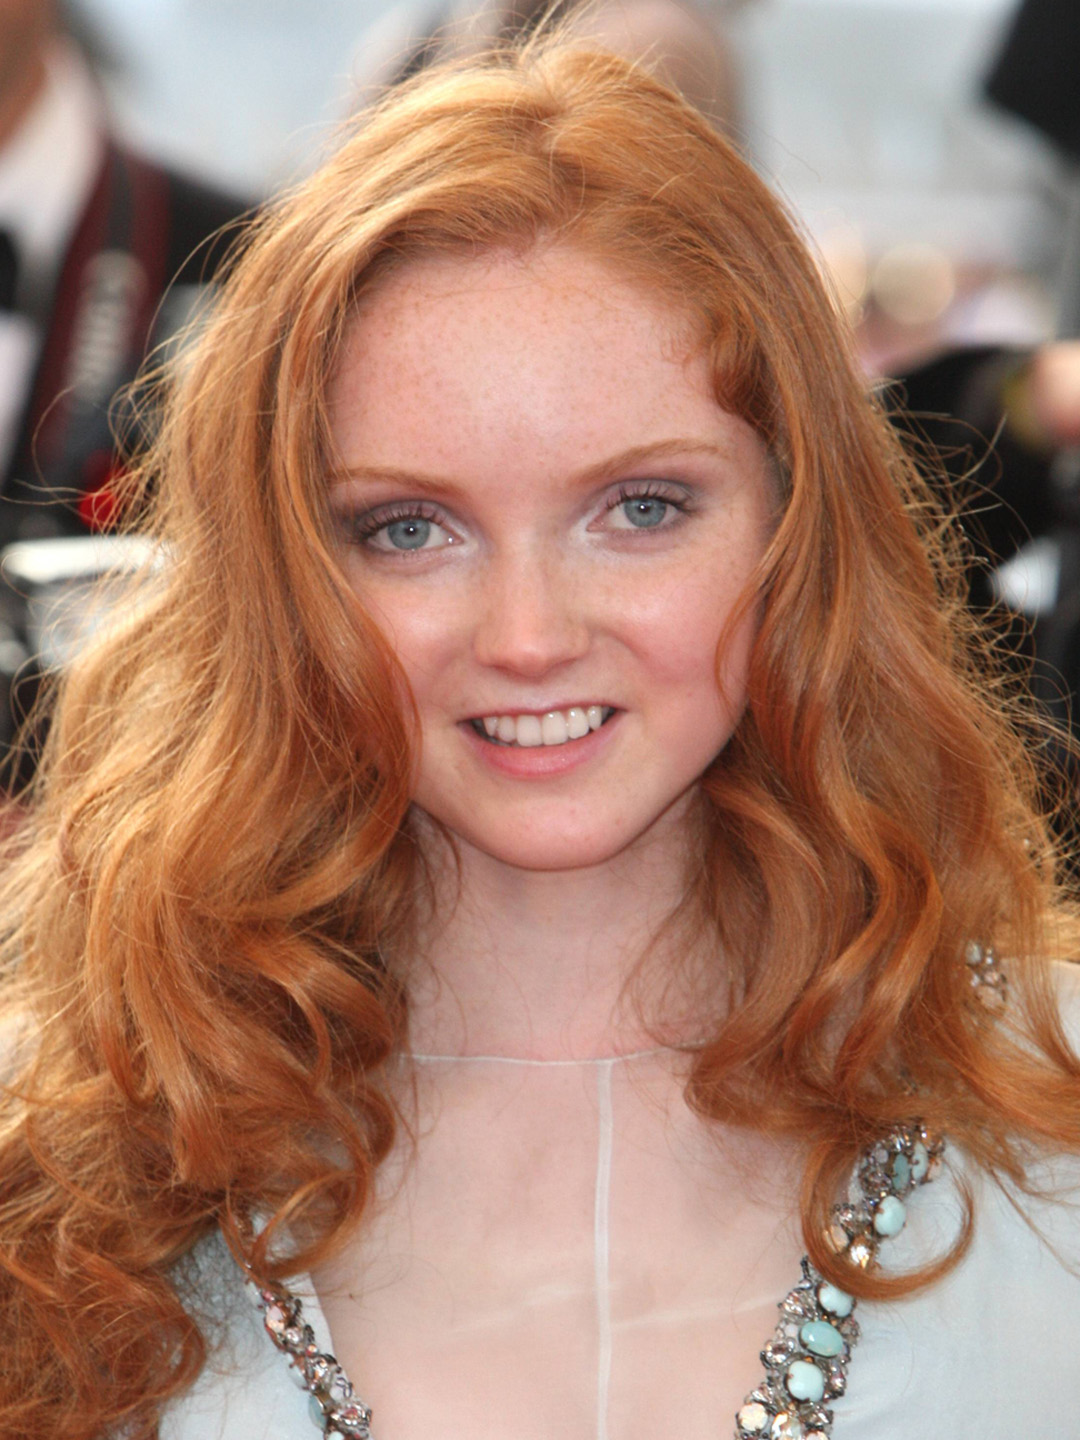 Image result for lily cole